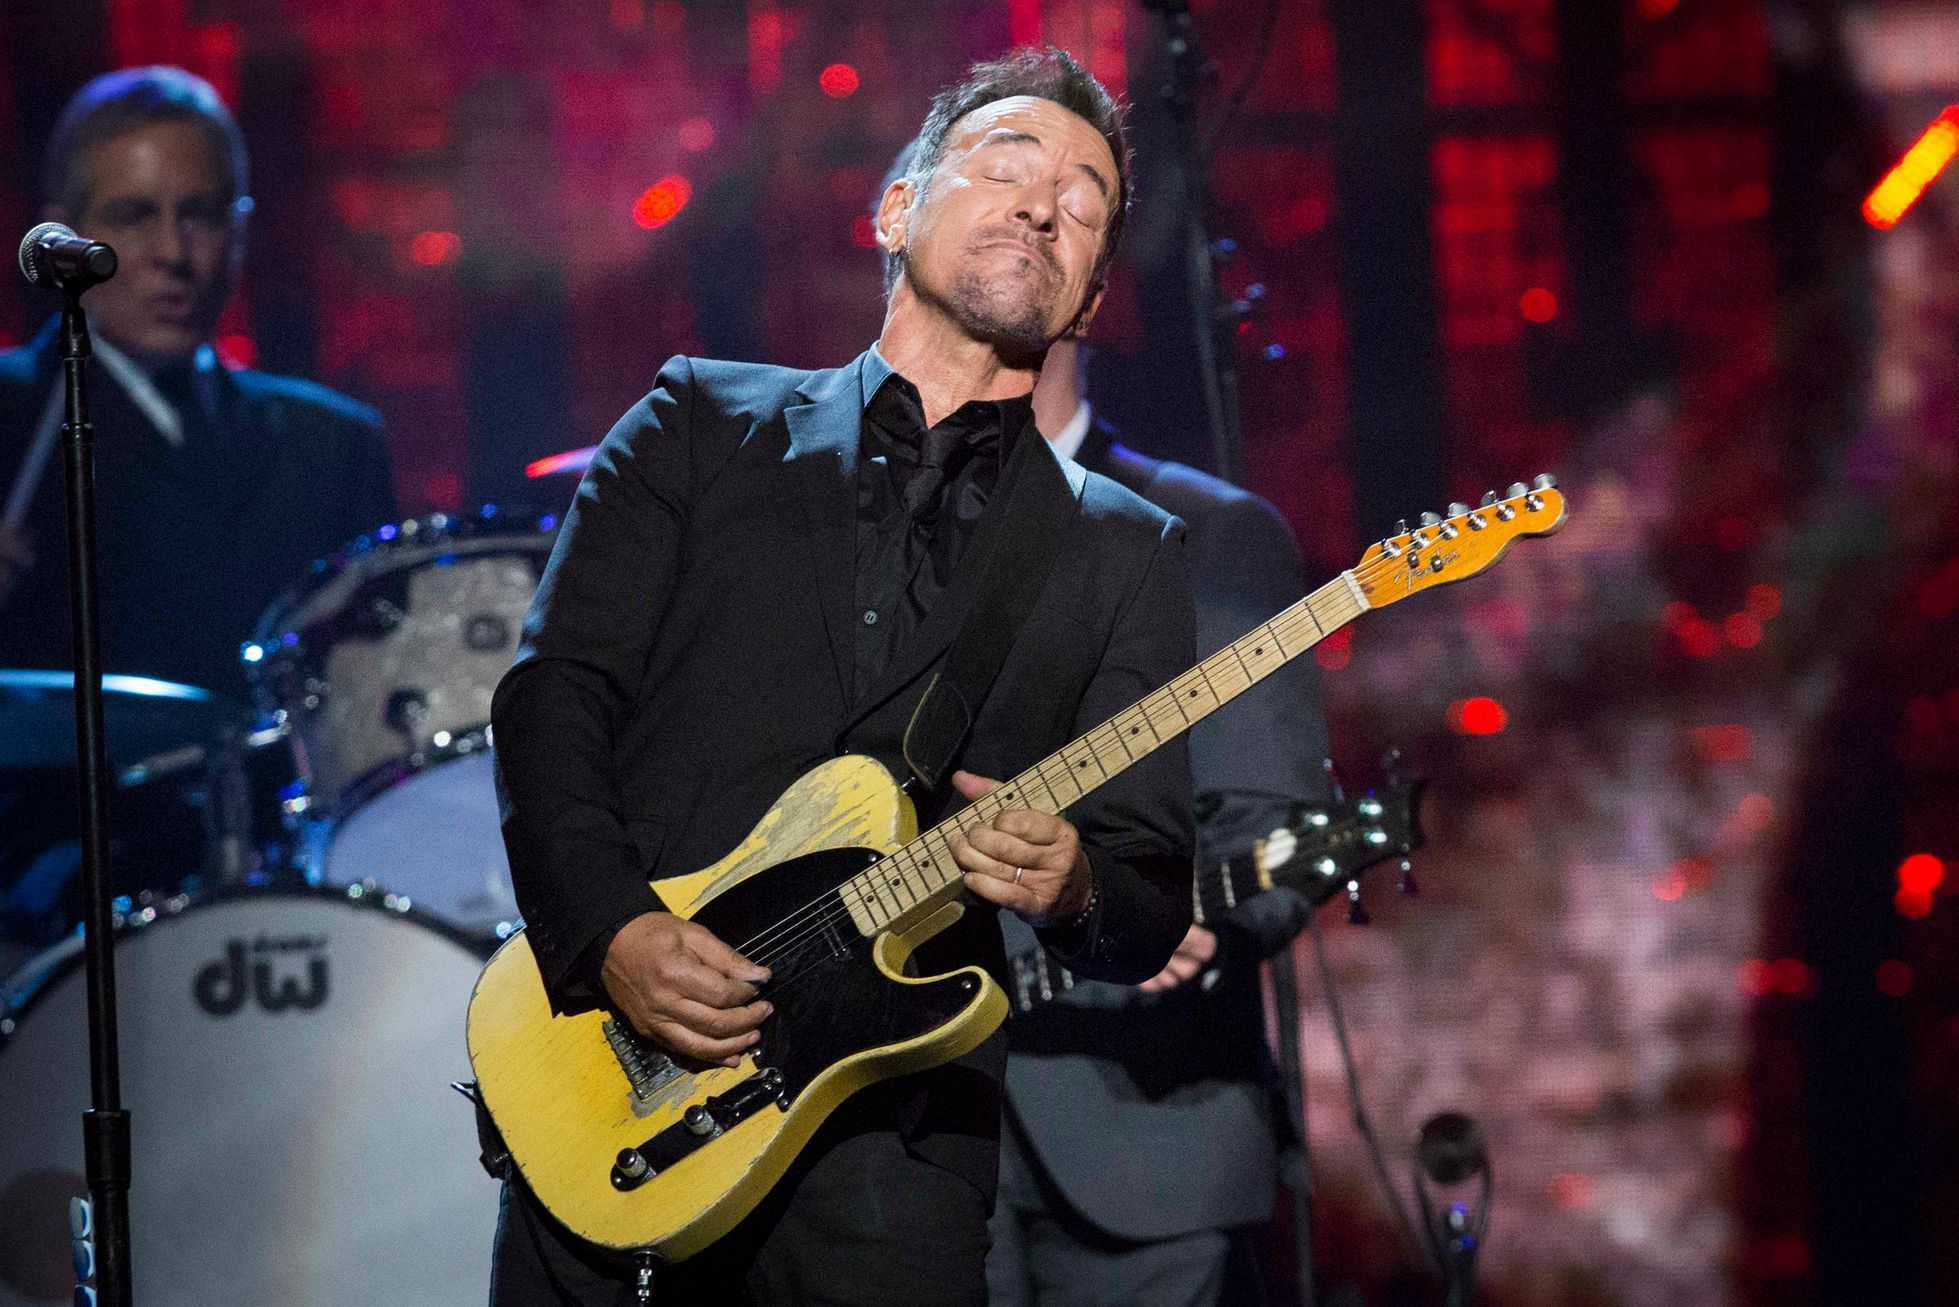 Singer-songwriter Bruce Springsteen performs during the 29th annual Rock and Roll Hall of Fame Induction Ceremony in Brooklyn, New York